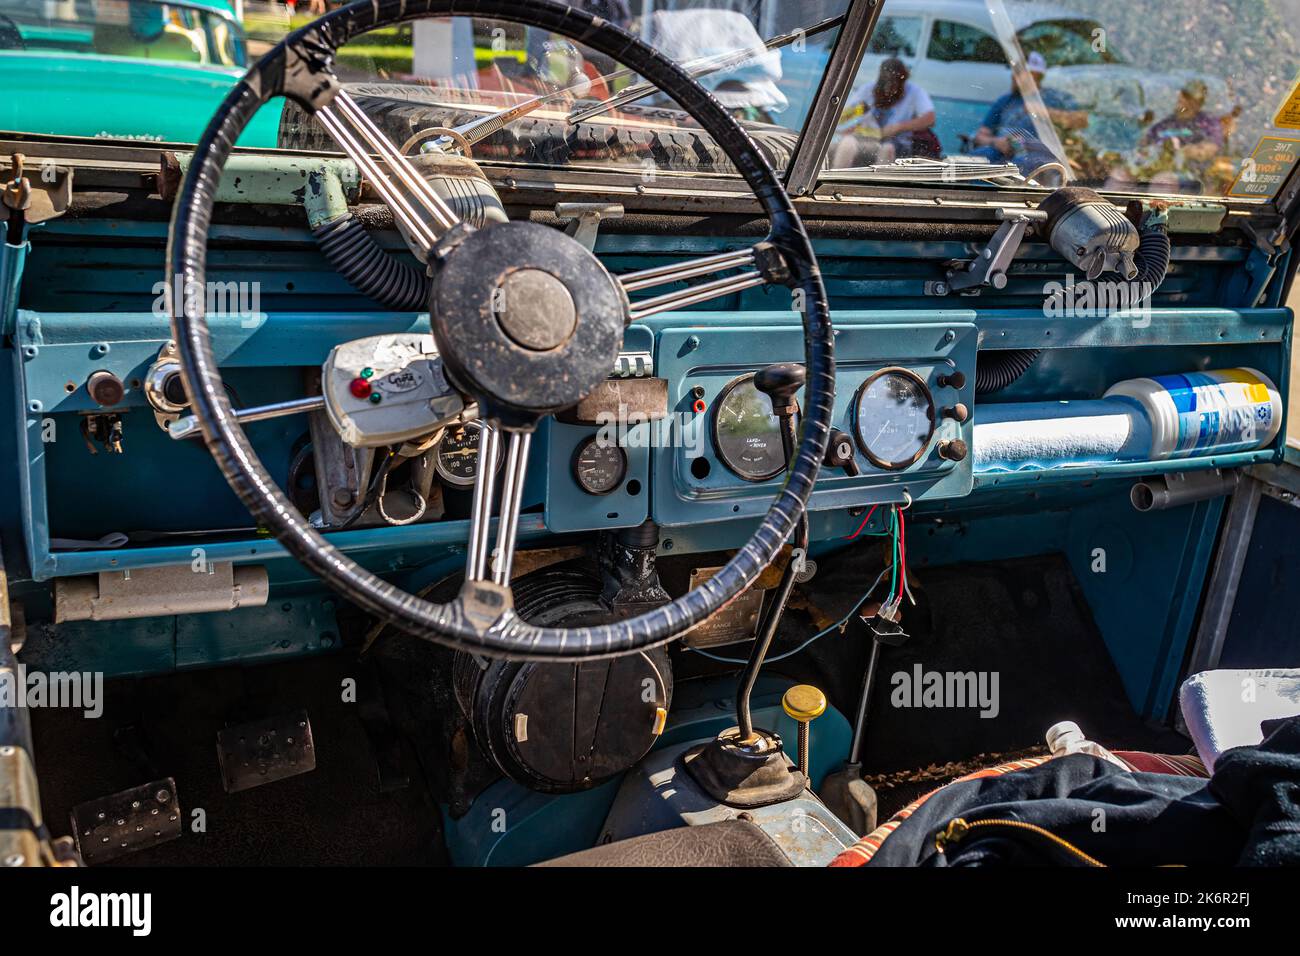 Falcon Heights, MN - June 19, 2022: Close up detail interior view of a 1955 Land Rover Series 1 107 Pickup at a local car show. Stock Photo